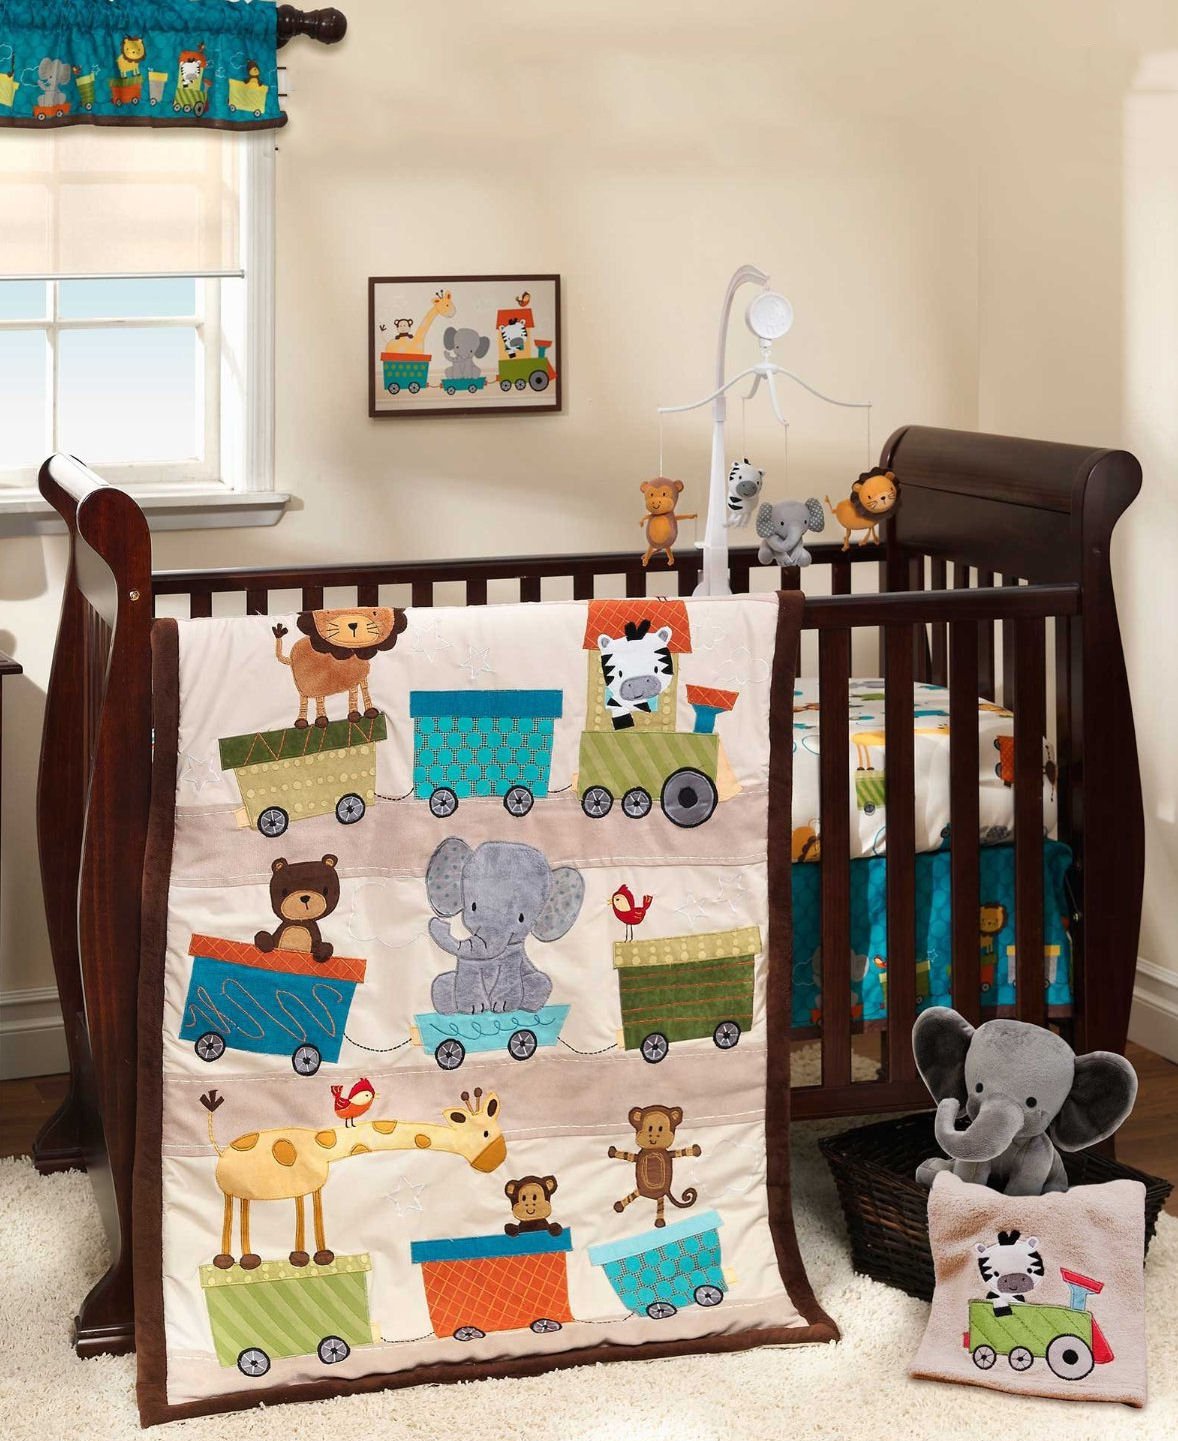 Baby circus animals train theme baby bedding for the crib with matching decor.